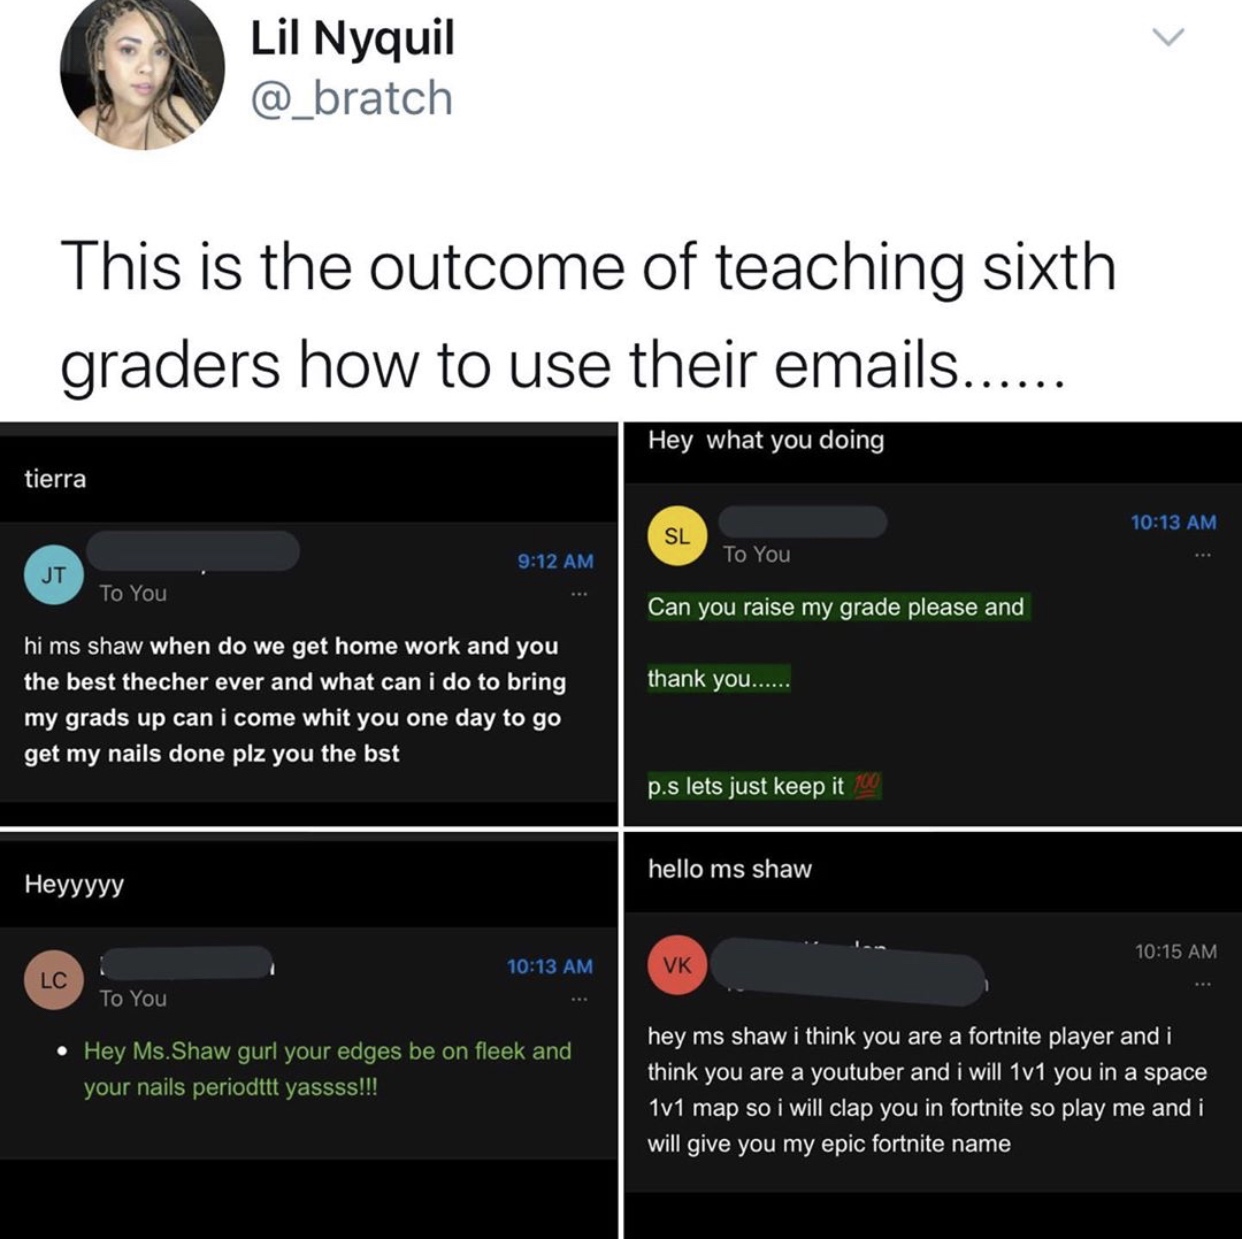 screenshot - Lil Nyquil This is the outcome of teaching sixth graders how to use their emails...... Hey what you doing tierra Sl To You Jt To You Can you raise my grade please and thank you...... hi ms shaw when do we get home work and you the best theche